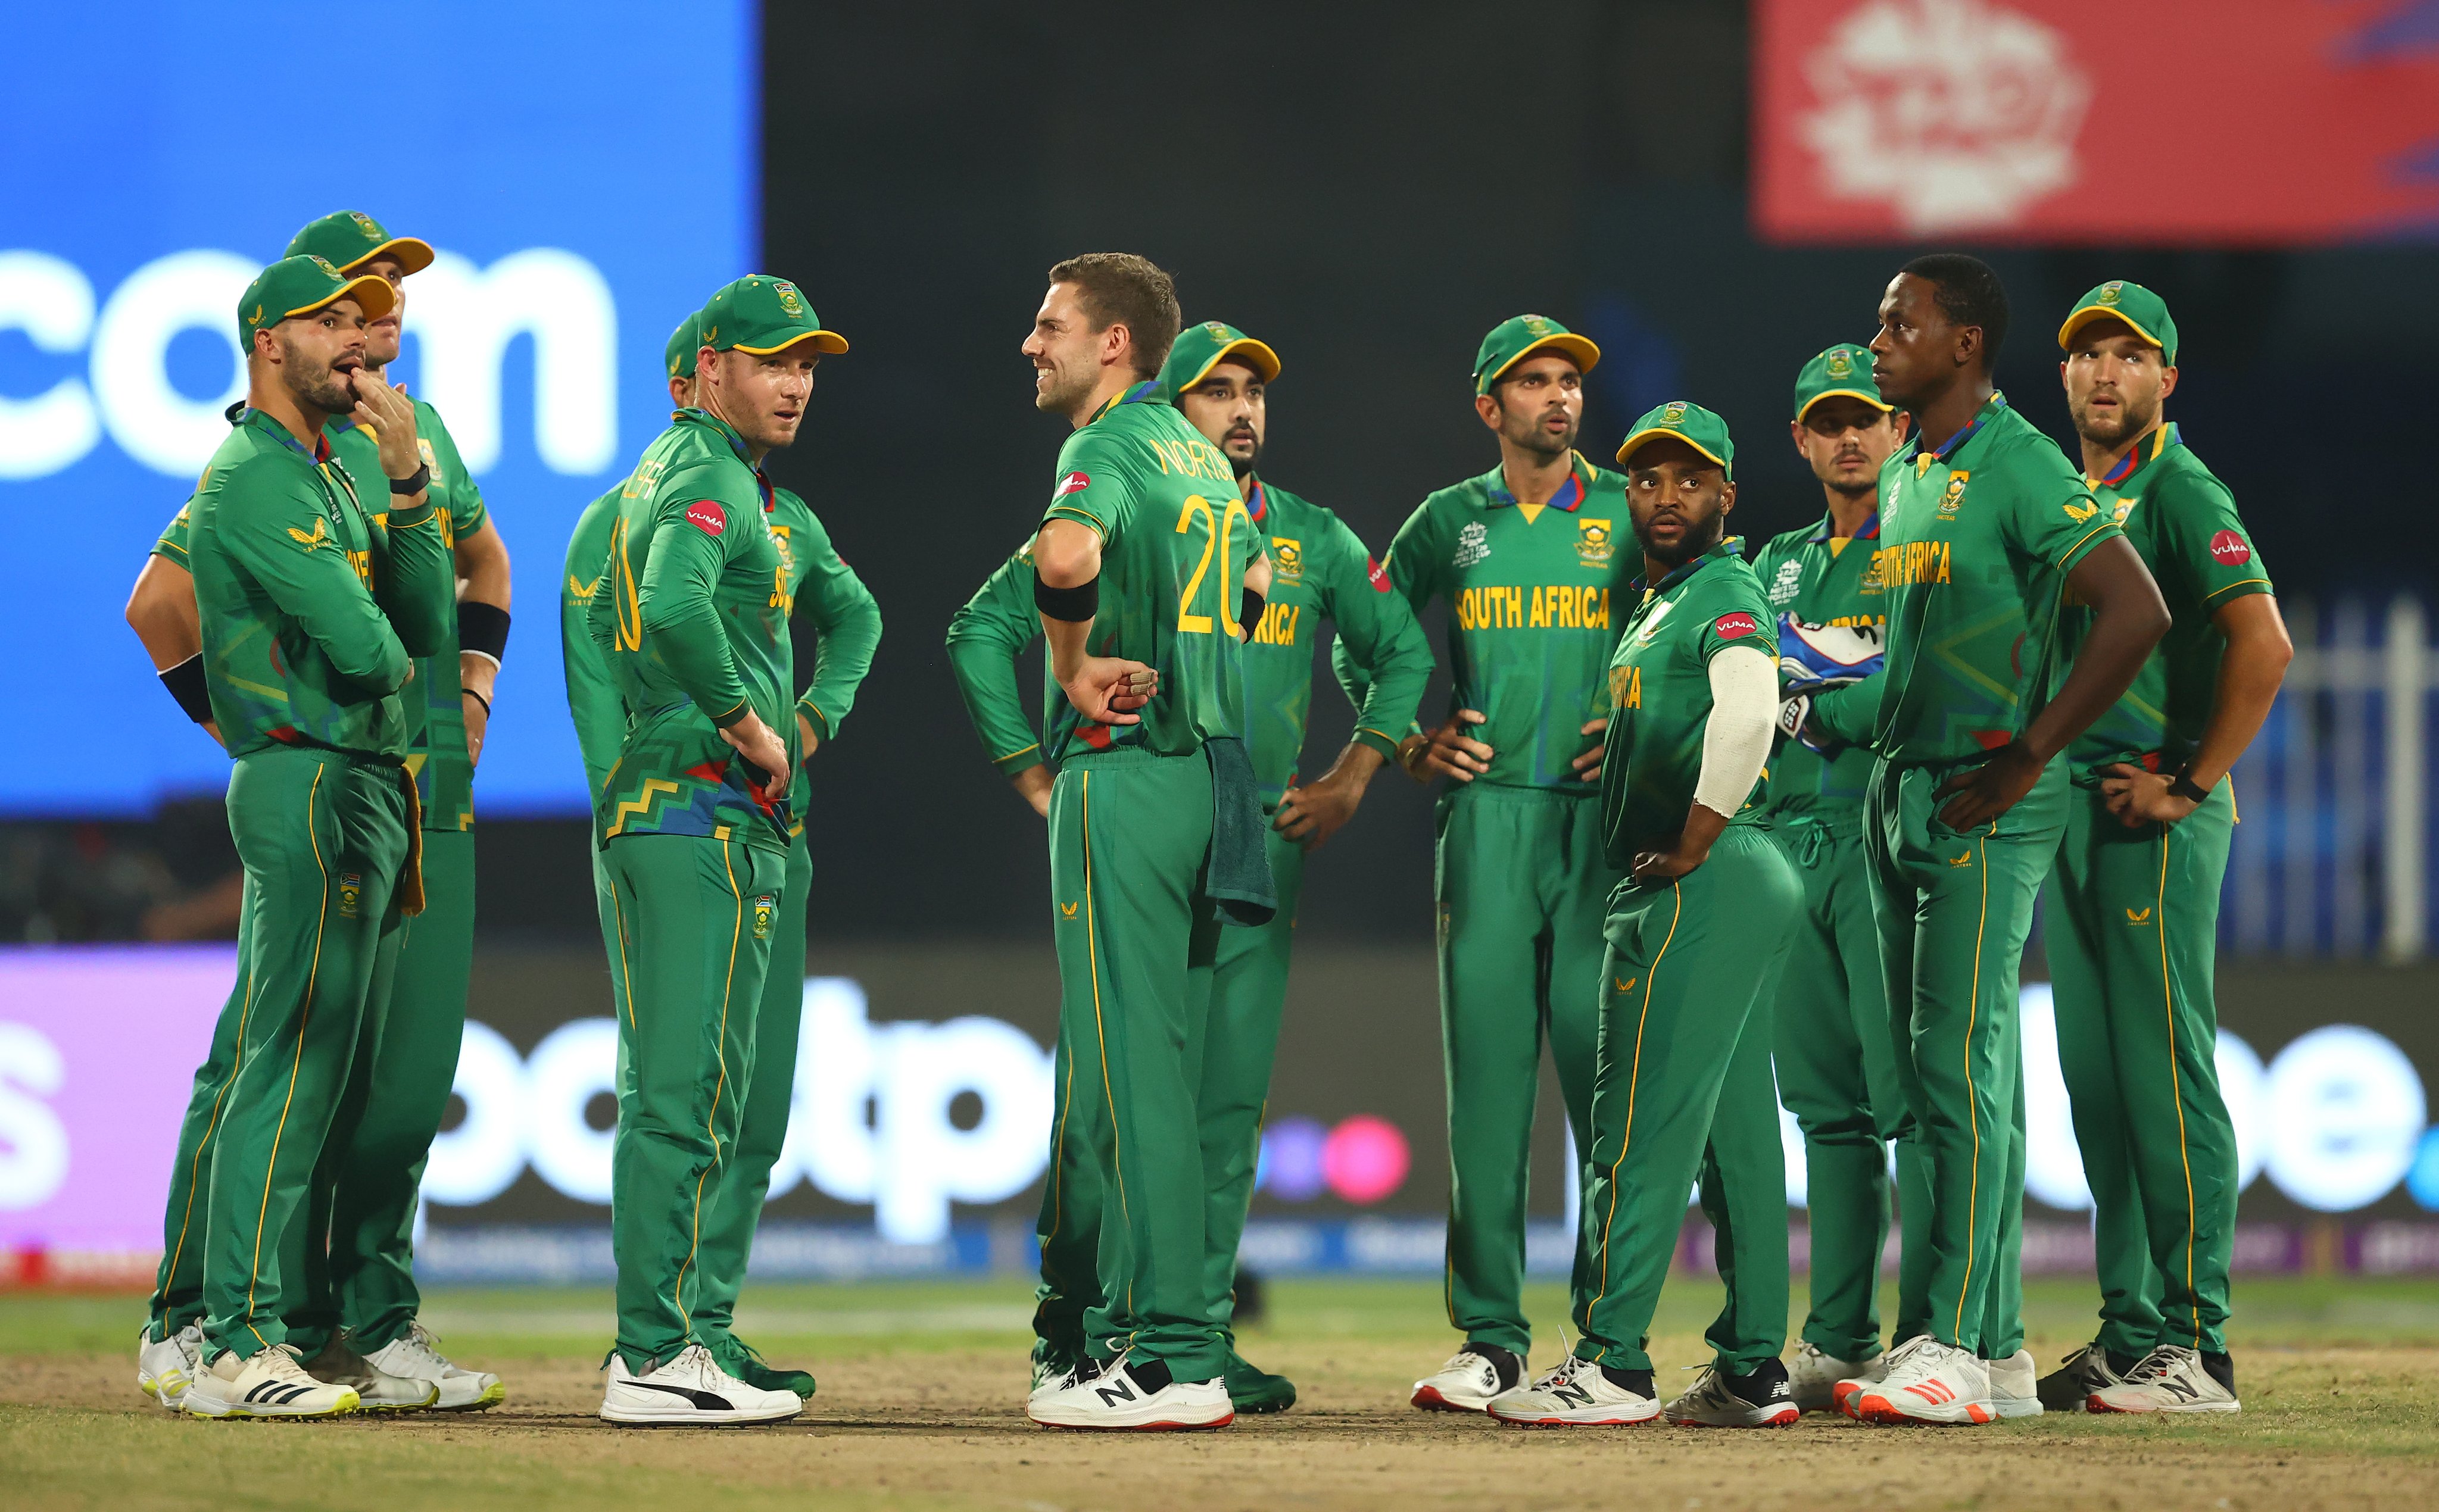 T20 World Cup 2021 |  'It is a bitter pill to swallow', says Mark Boucher as South Africa exit the tournament